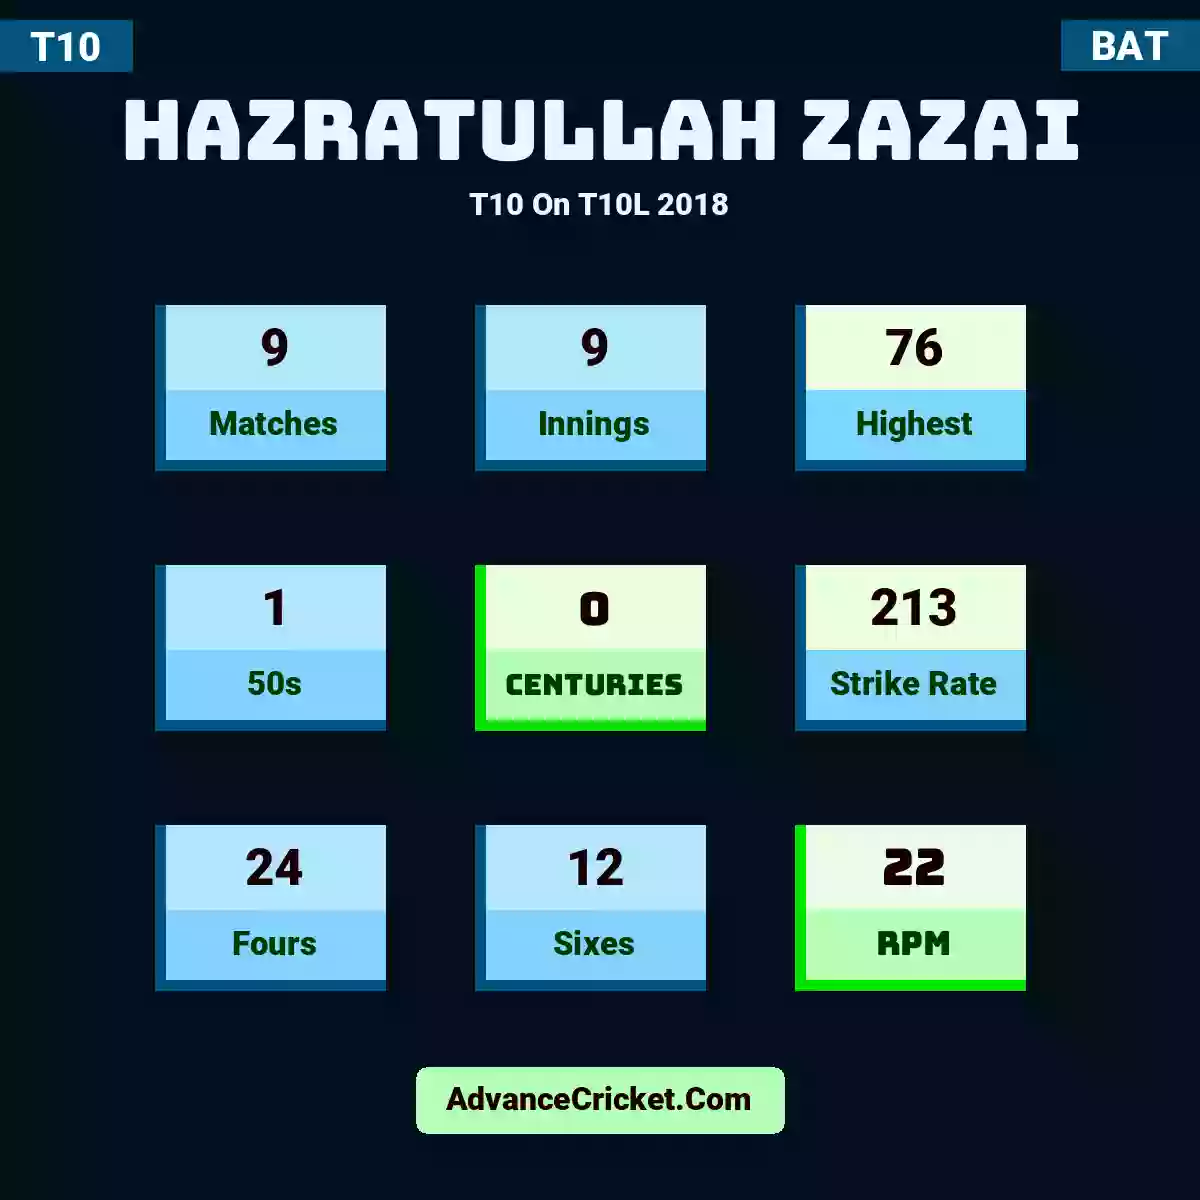 Hazratullah Zazai T10  On T10L 2018, Hazratullah Zazai played 9 matches, scored 76 runs as highest, 1 half-centuries, and 0 centuries, with a strike rate of 213. H.Zazai hit 24 fours and 12 sixes, with an RPM of 22.